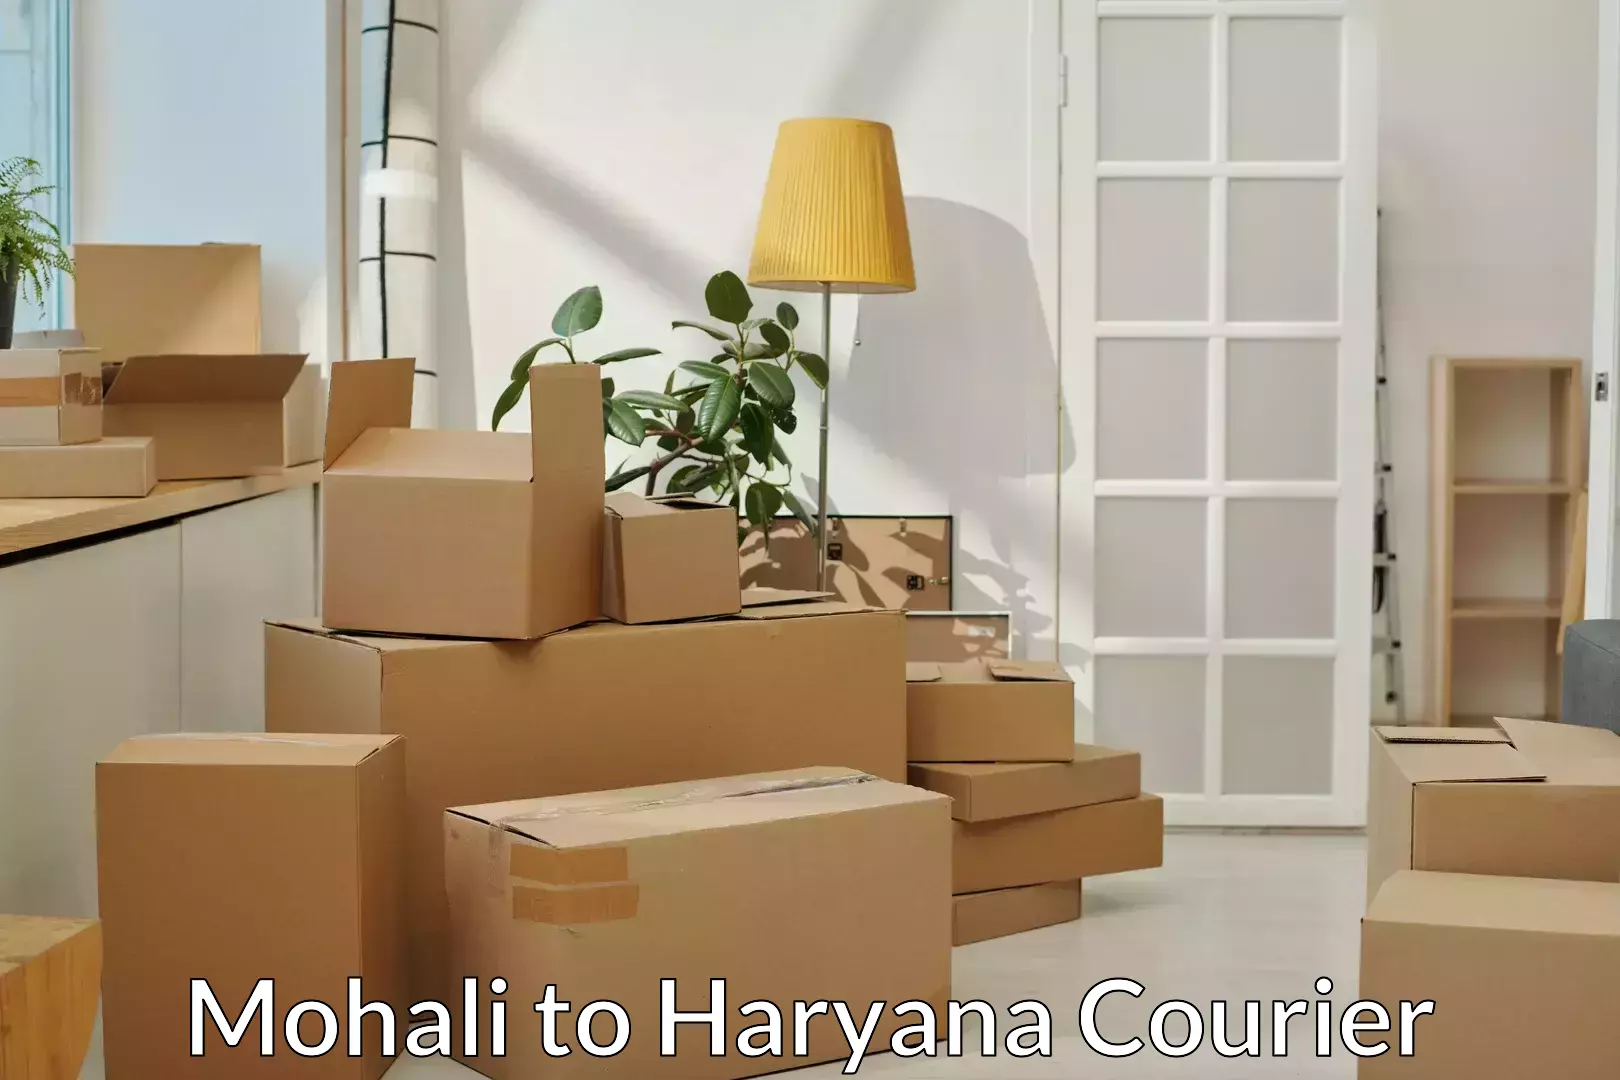 Trusted relocation services in Mohali to Bilaspur Haryana